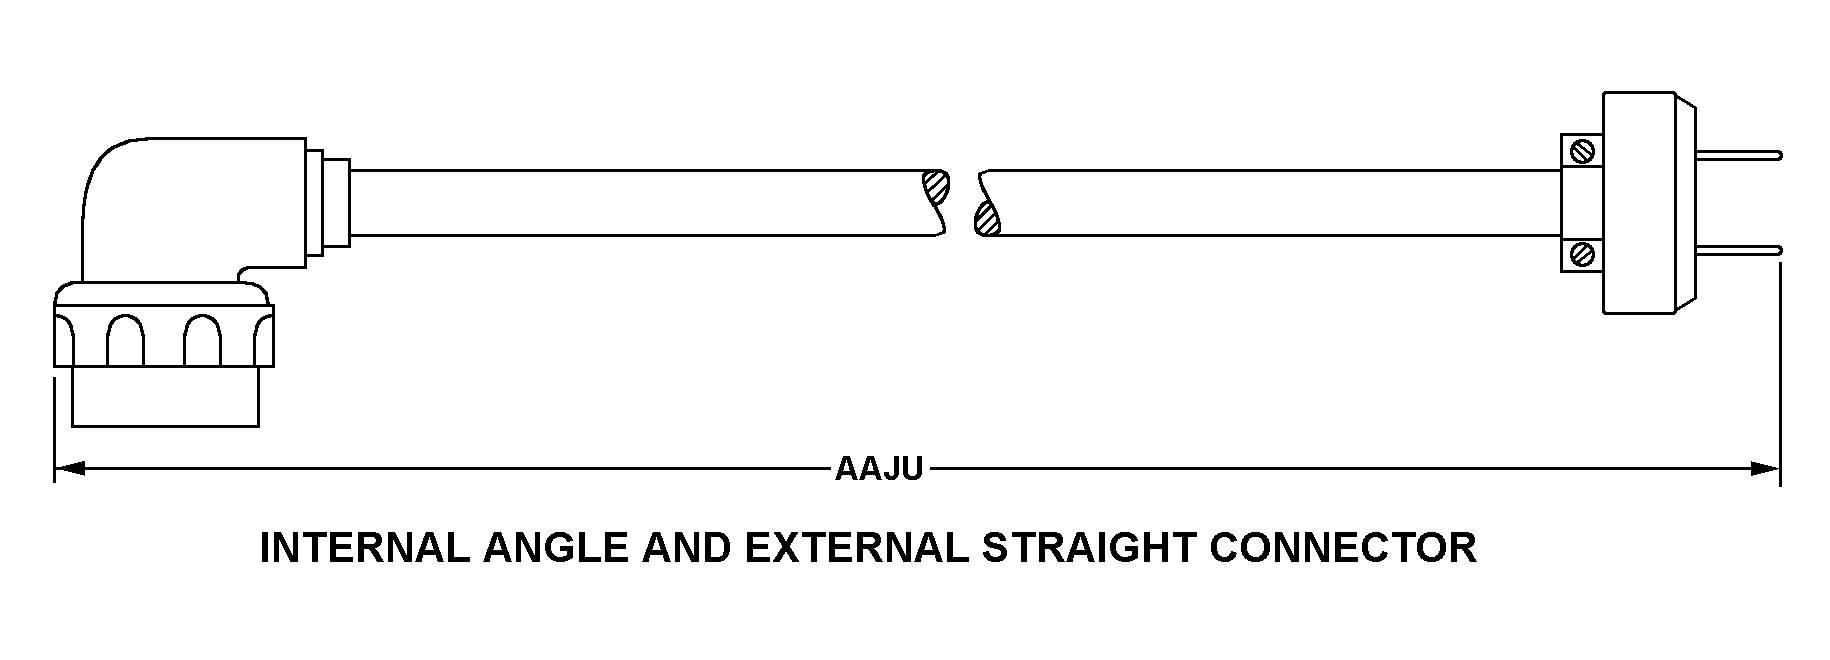 INTERNAL ANGLE AND EXTERNAL STRAIGHT CONNECTOR style nsn 5995-01-098-1665